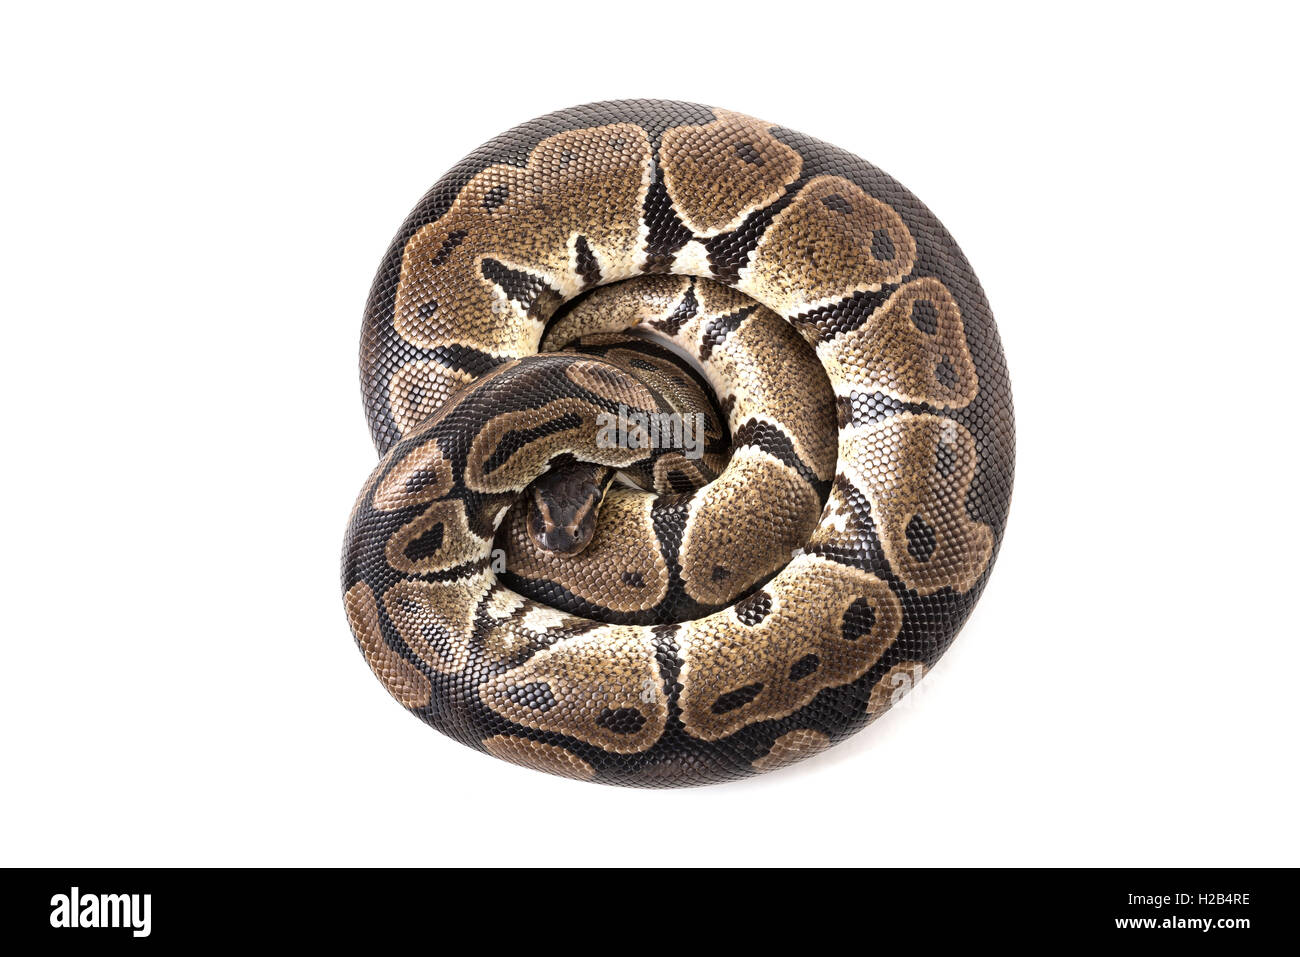 Beautiful python isolated in a white background Stock Photo